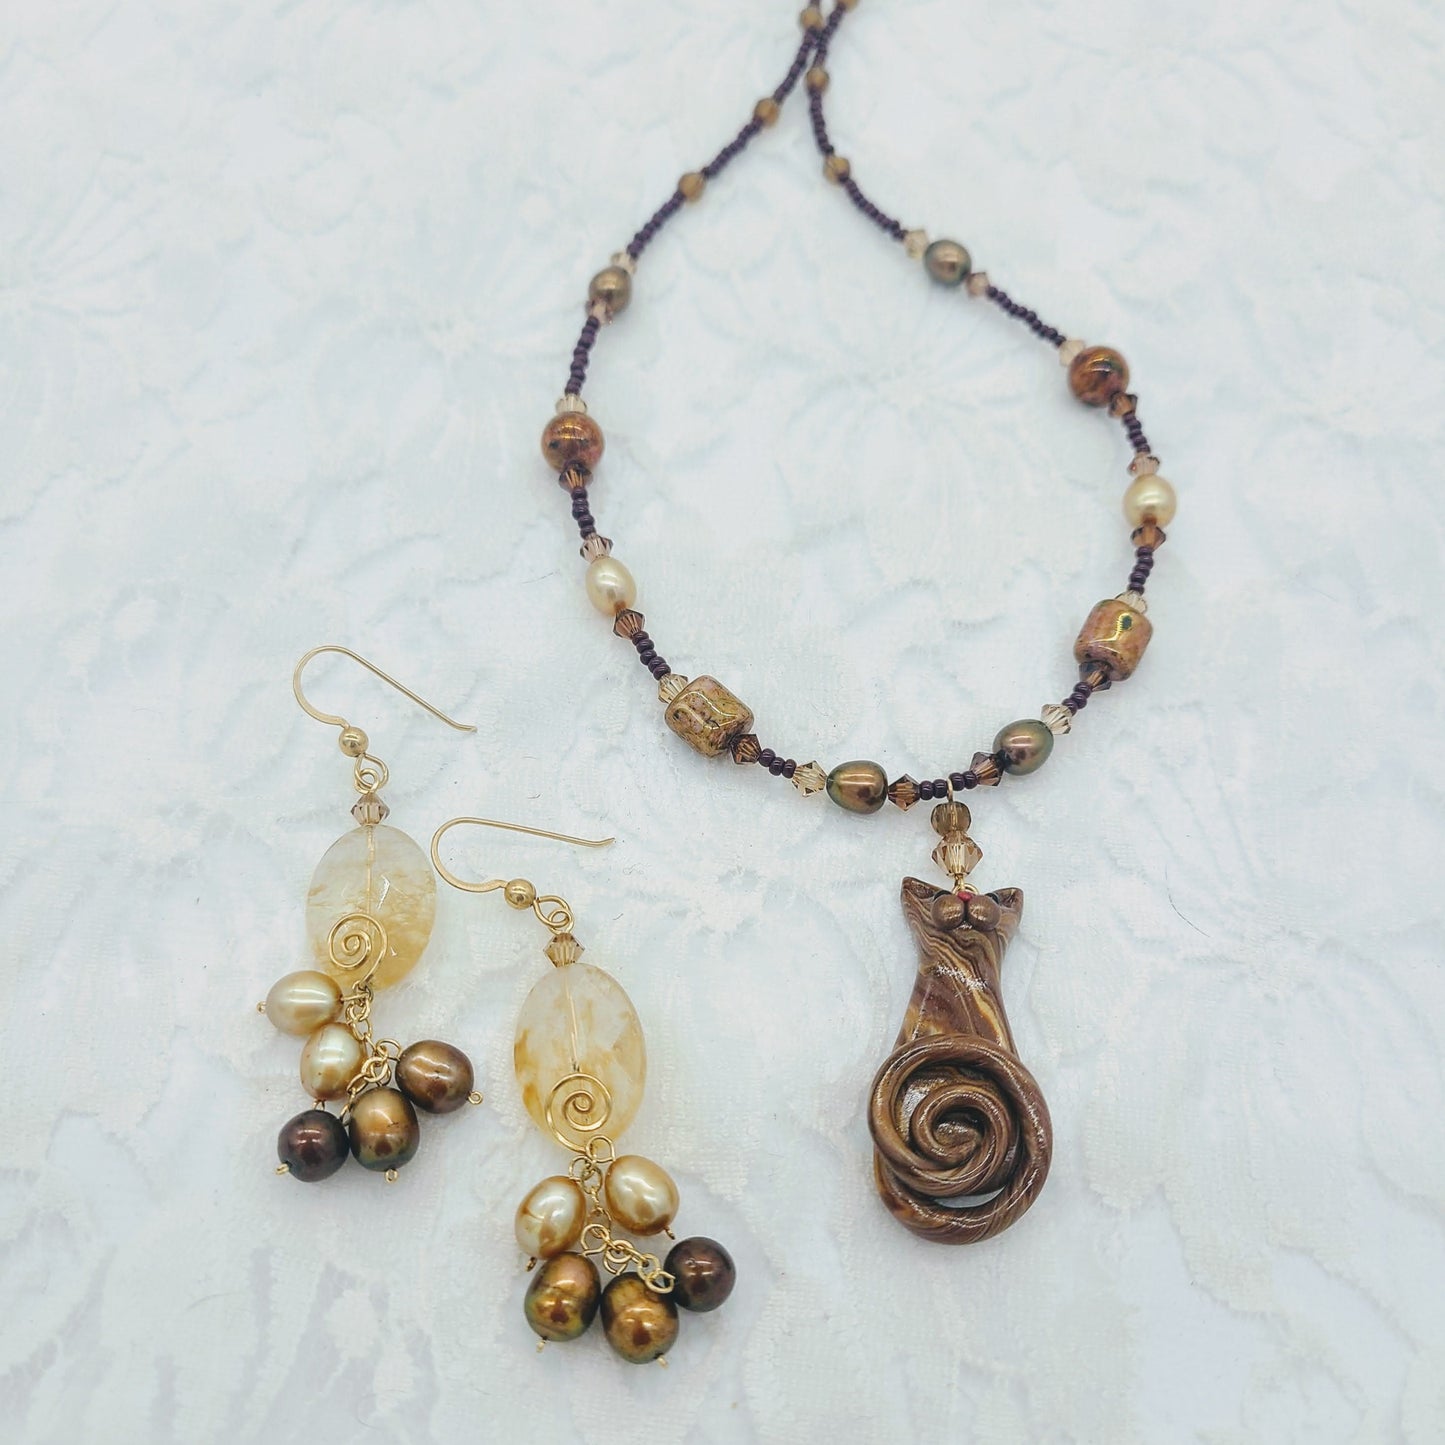 Jewelry Set Cat Necklace & Matching Earrings ~ Rutilated Quartz and Amber Aura Swarovski Faceted Crystal Beads w/Swarovski Pearls & 24kt Gold Accents ~ OOAK Jewelry SET